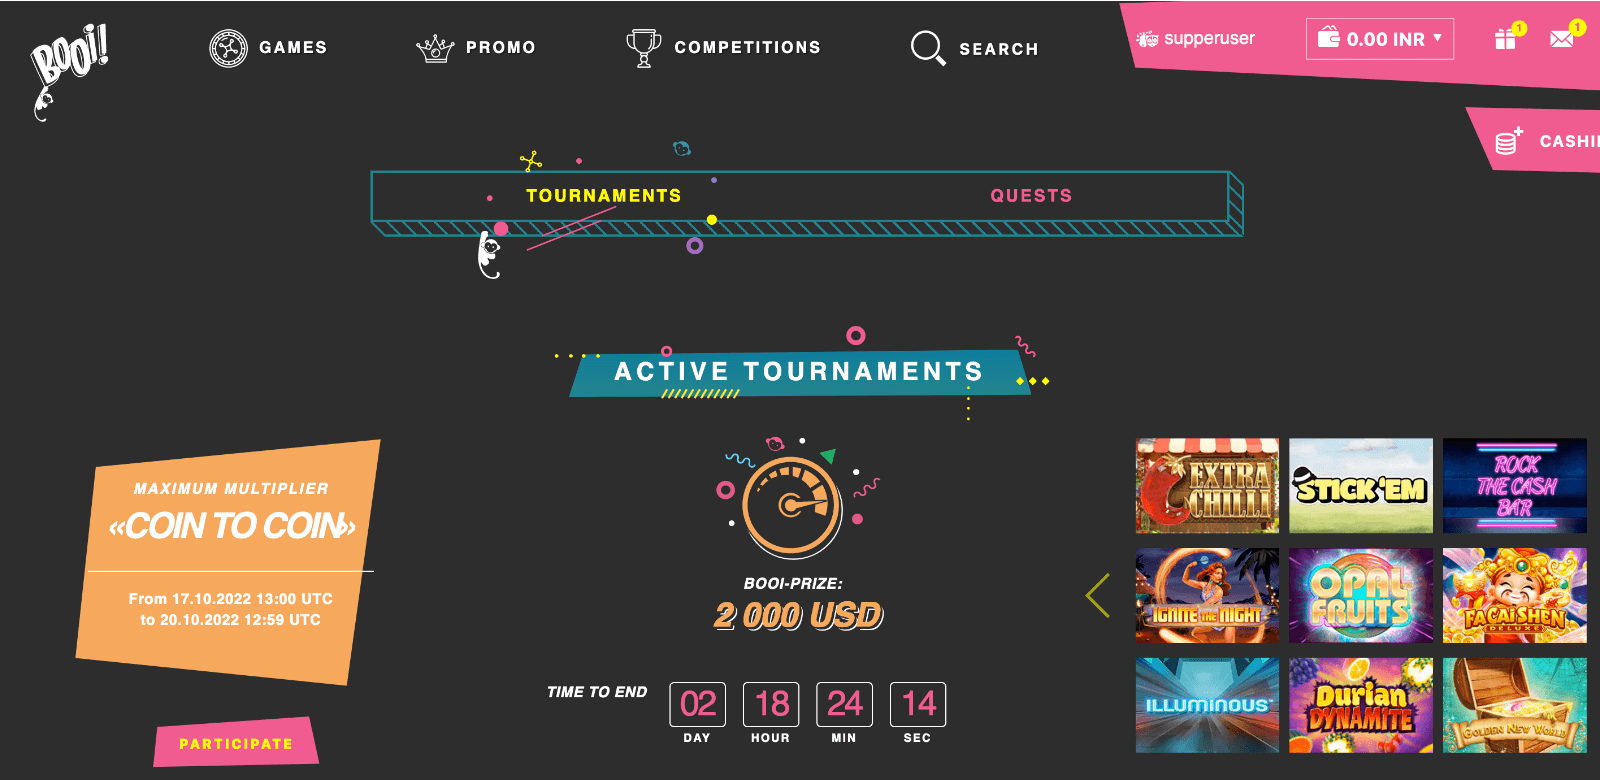 Page with current tournaments at Booi website